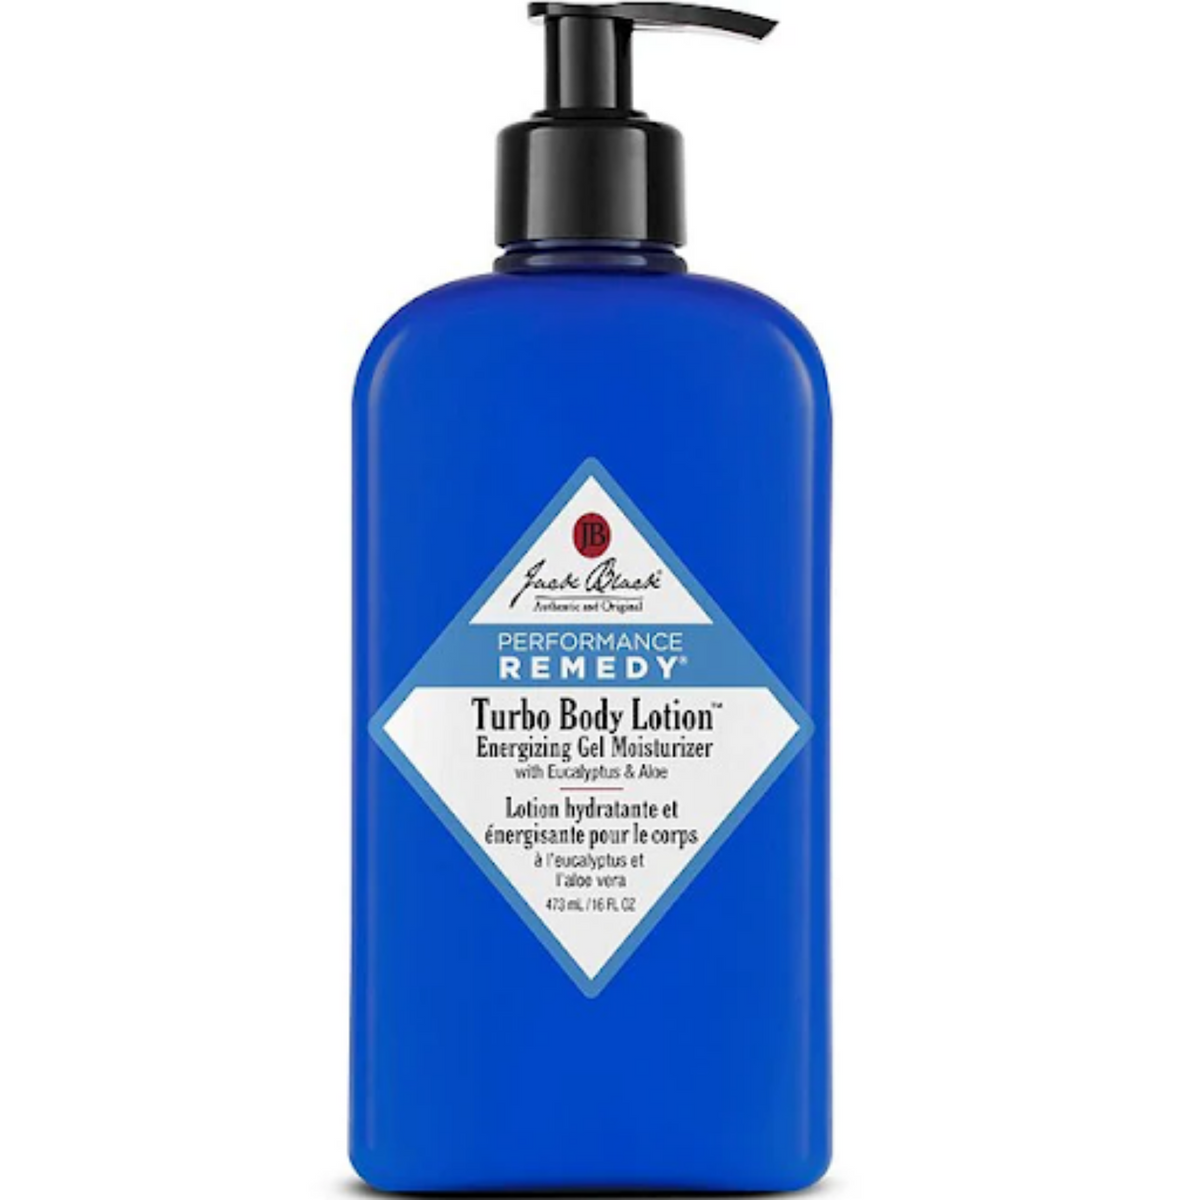 Primary Image of Turbo Body Lotion